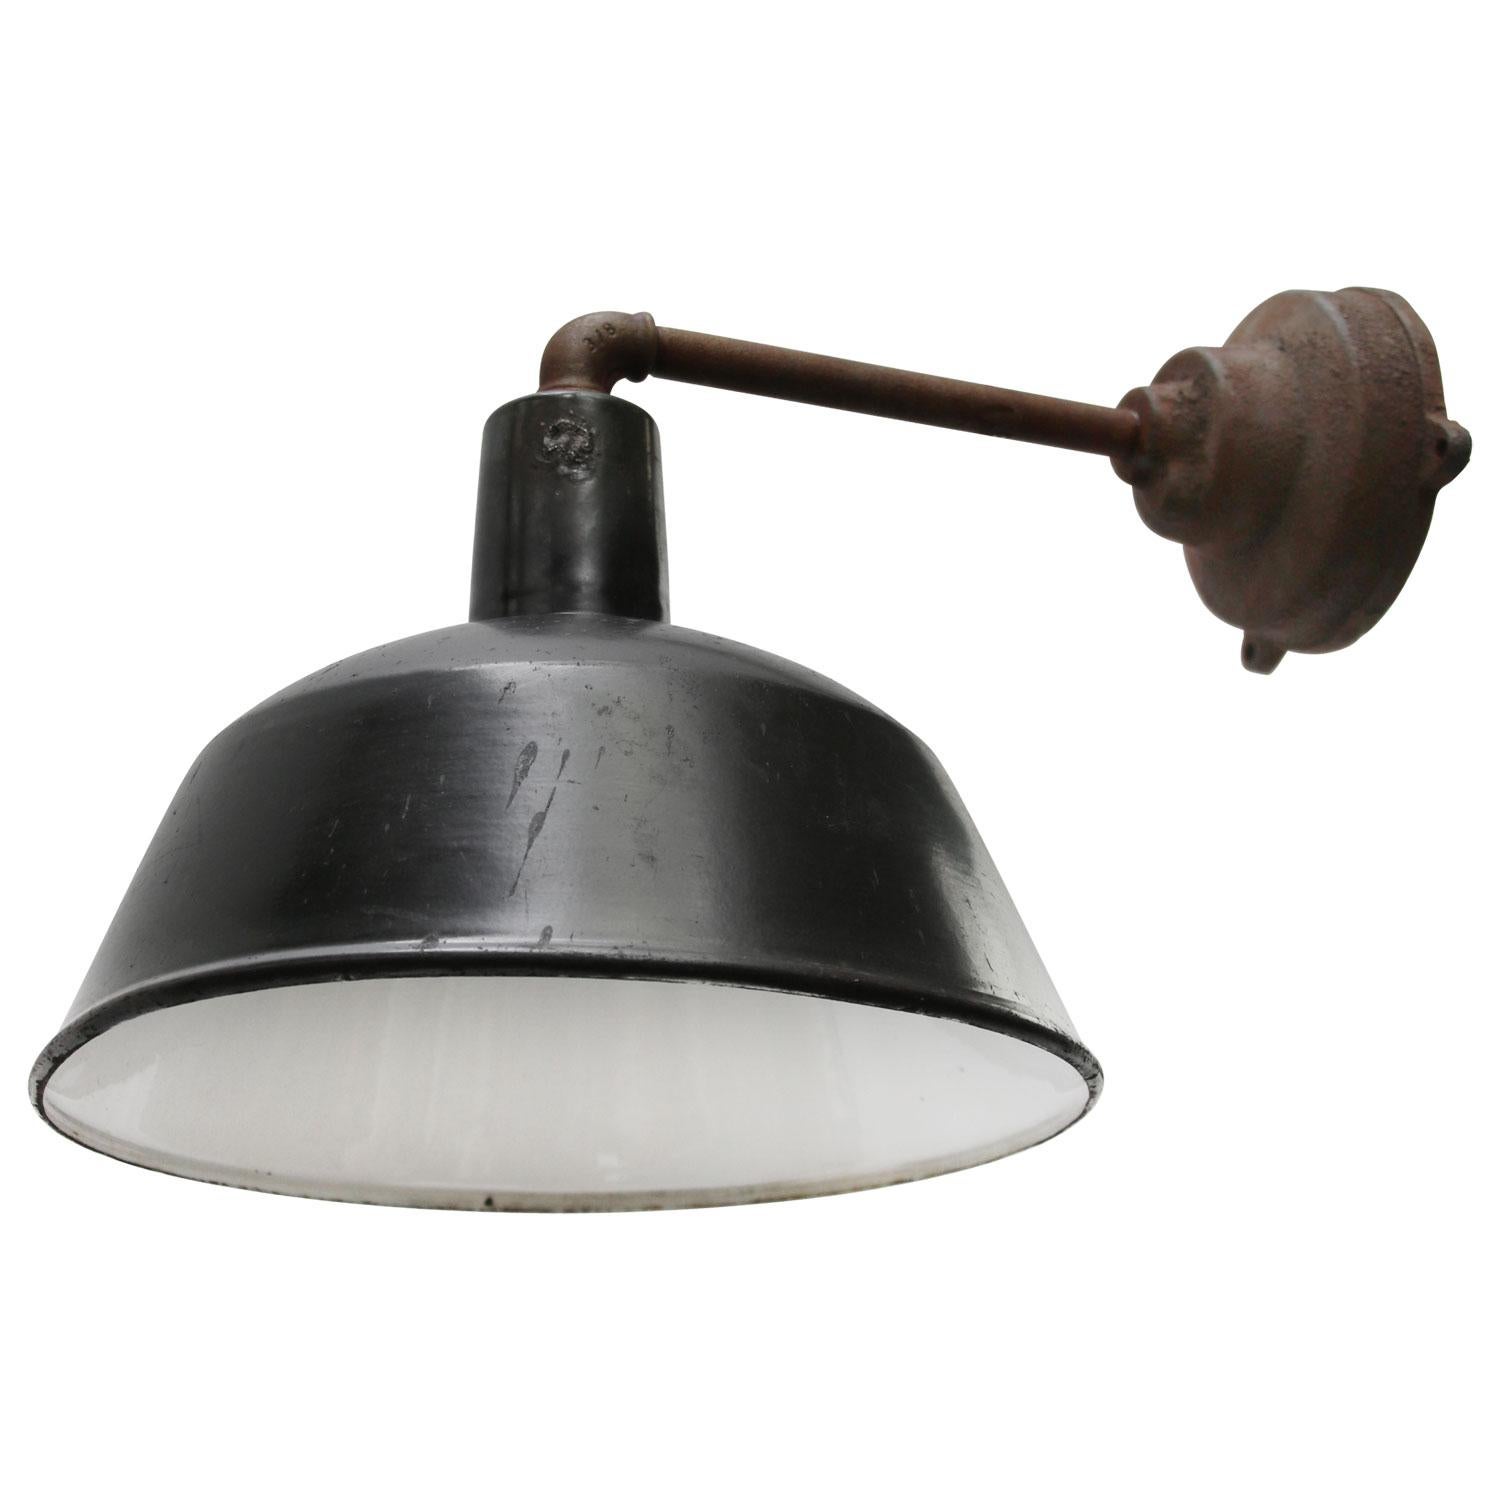 Black Enamel Vintage Industrial Cast Iron Factory Wall Lights In Good Condition For Sale In Amsterdam, NL